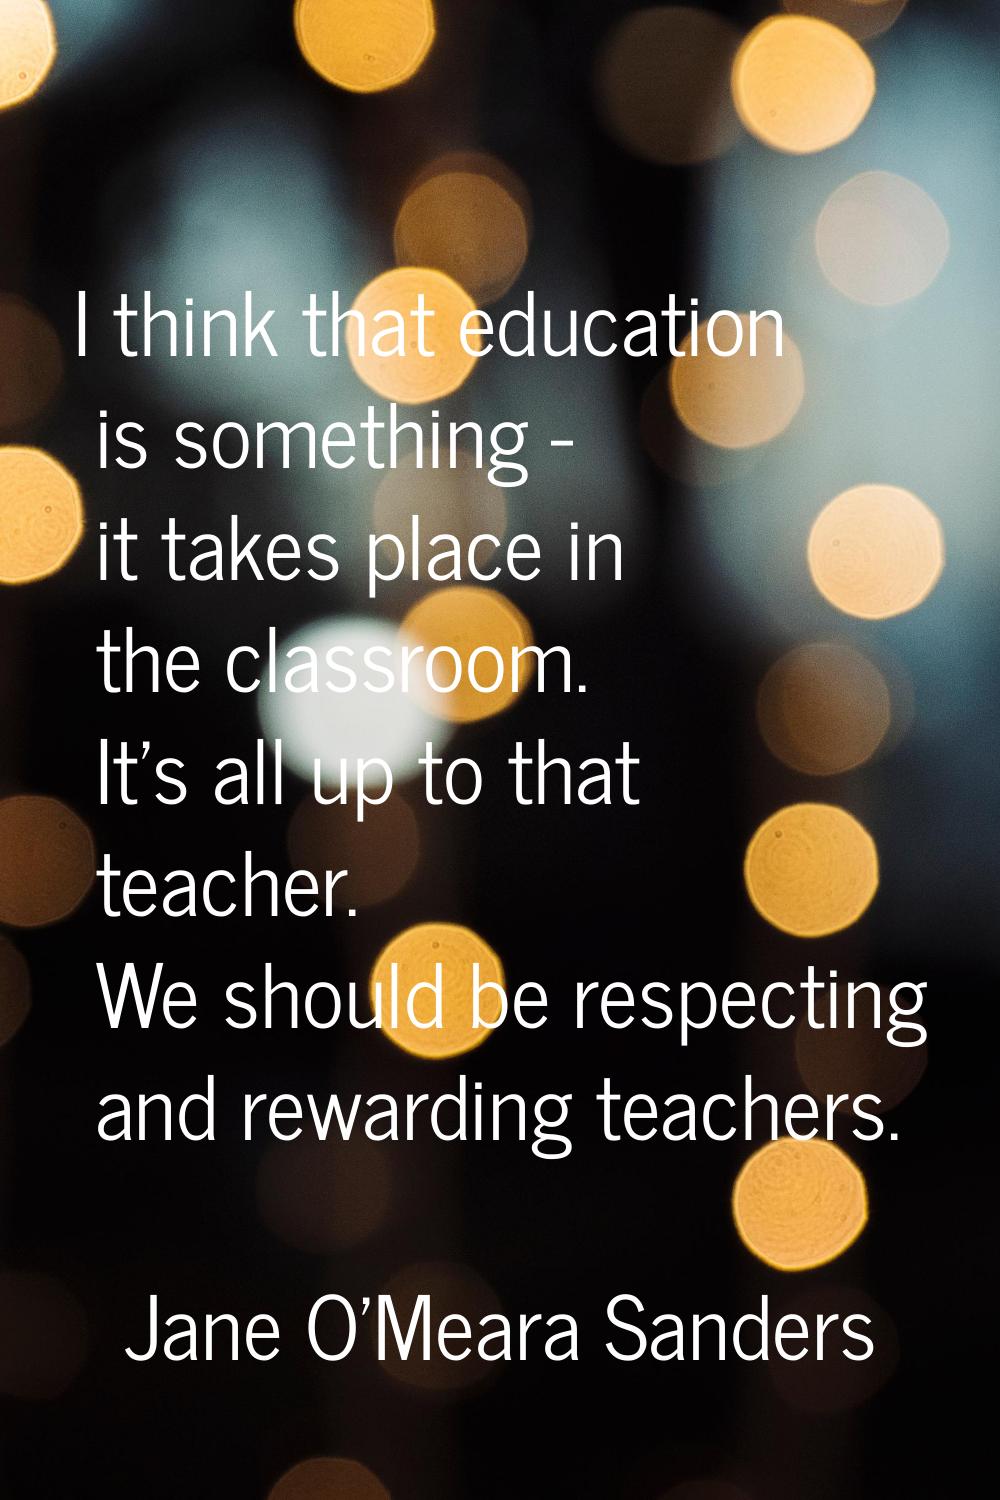 I think that education is something - it takes place in the classroom. It's all up to that teacher.